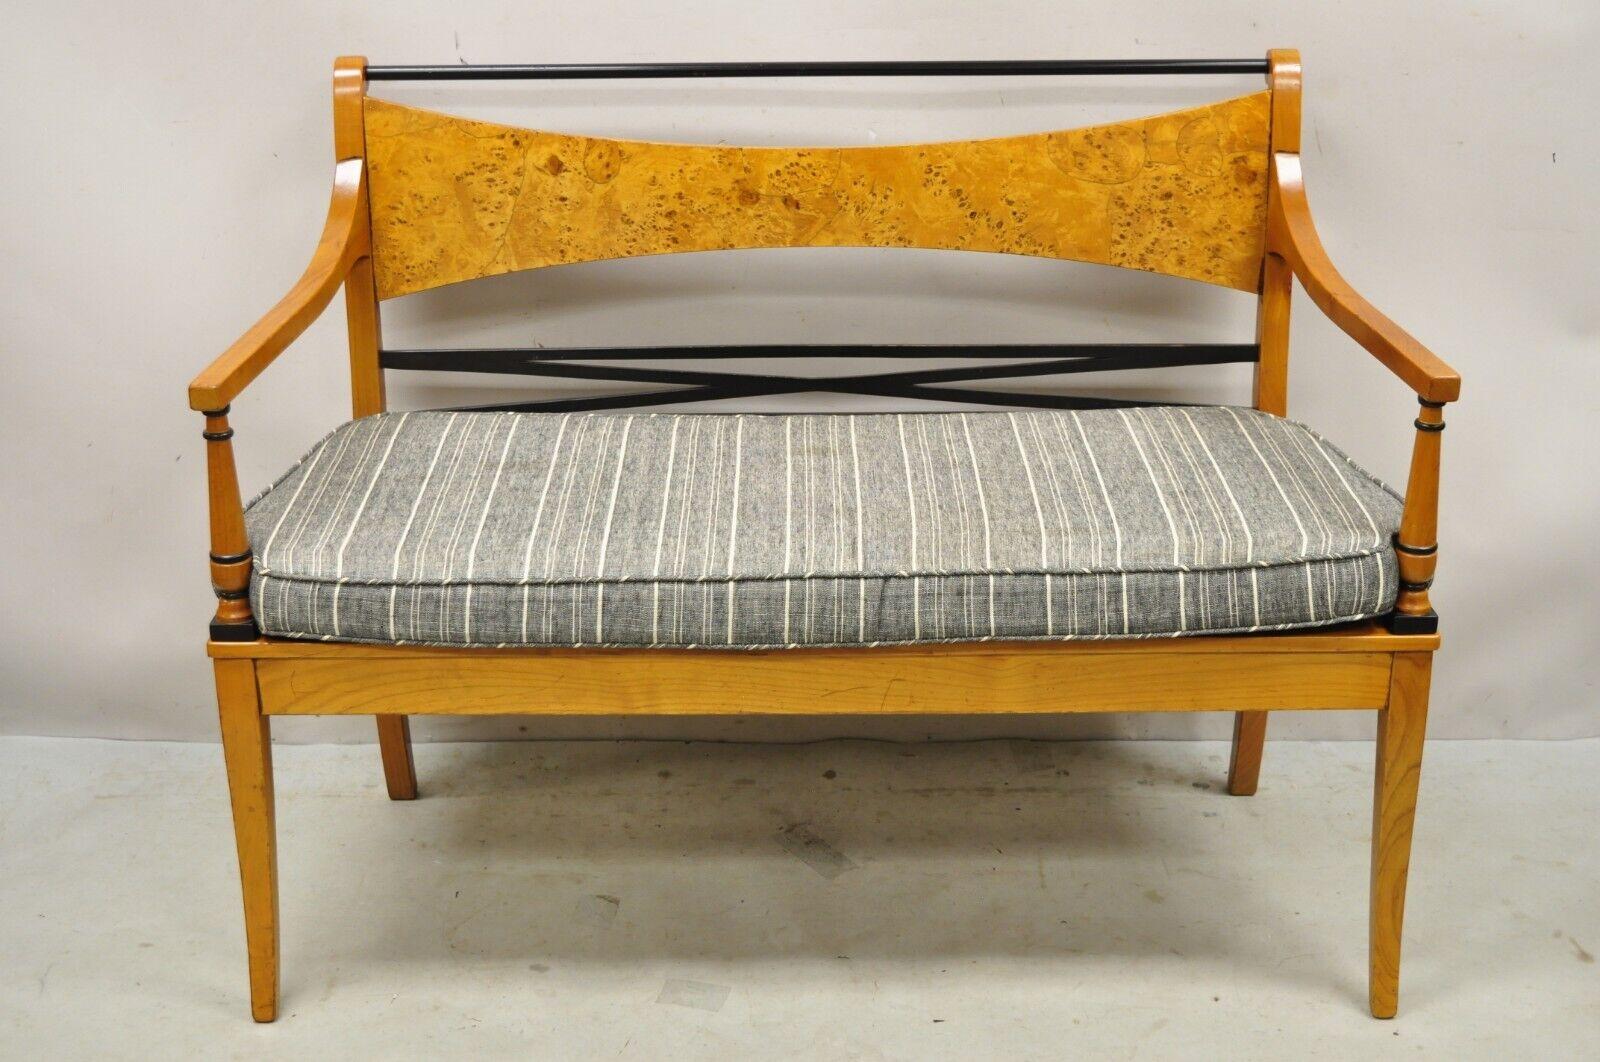 Vintage Italian Biedermeier X-Frame Burlwood Cane Seat Klismos Long Bench Settee. Item features a beautiful wood grain, cane seat, quality Italian craftsmanship, great style and form. Circa Mid to Late 20th Century.
Measurements: 
36